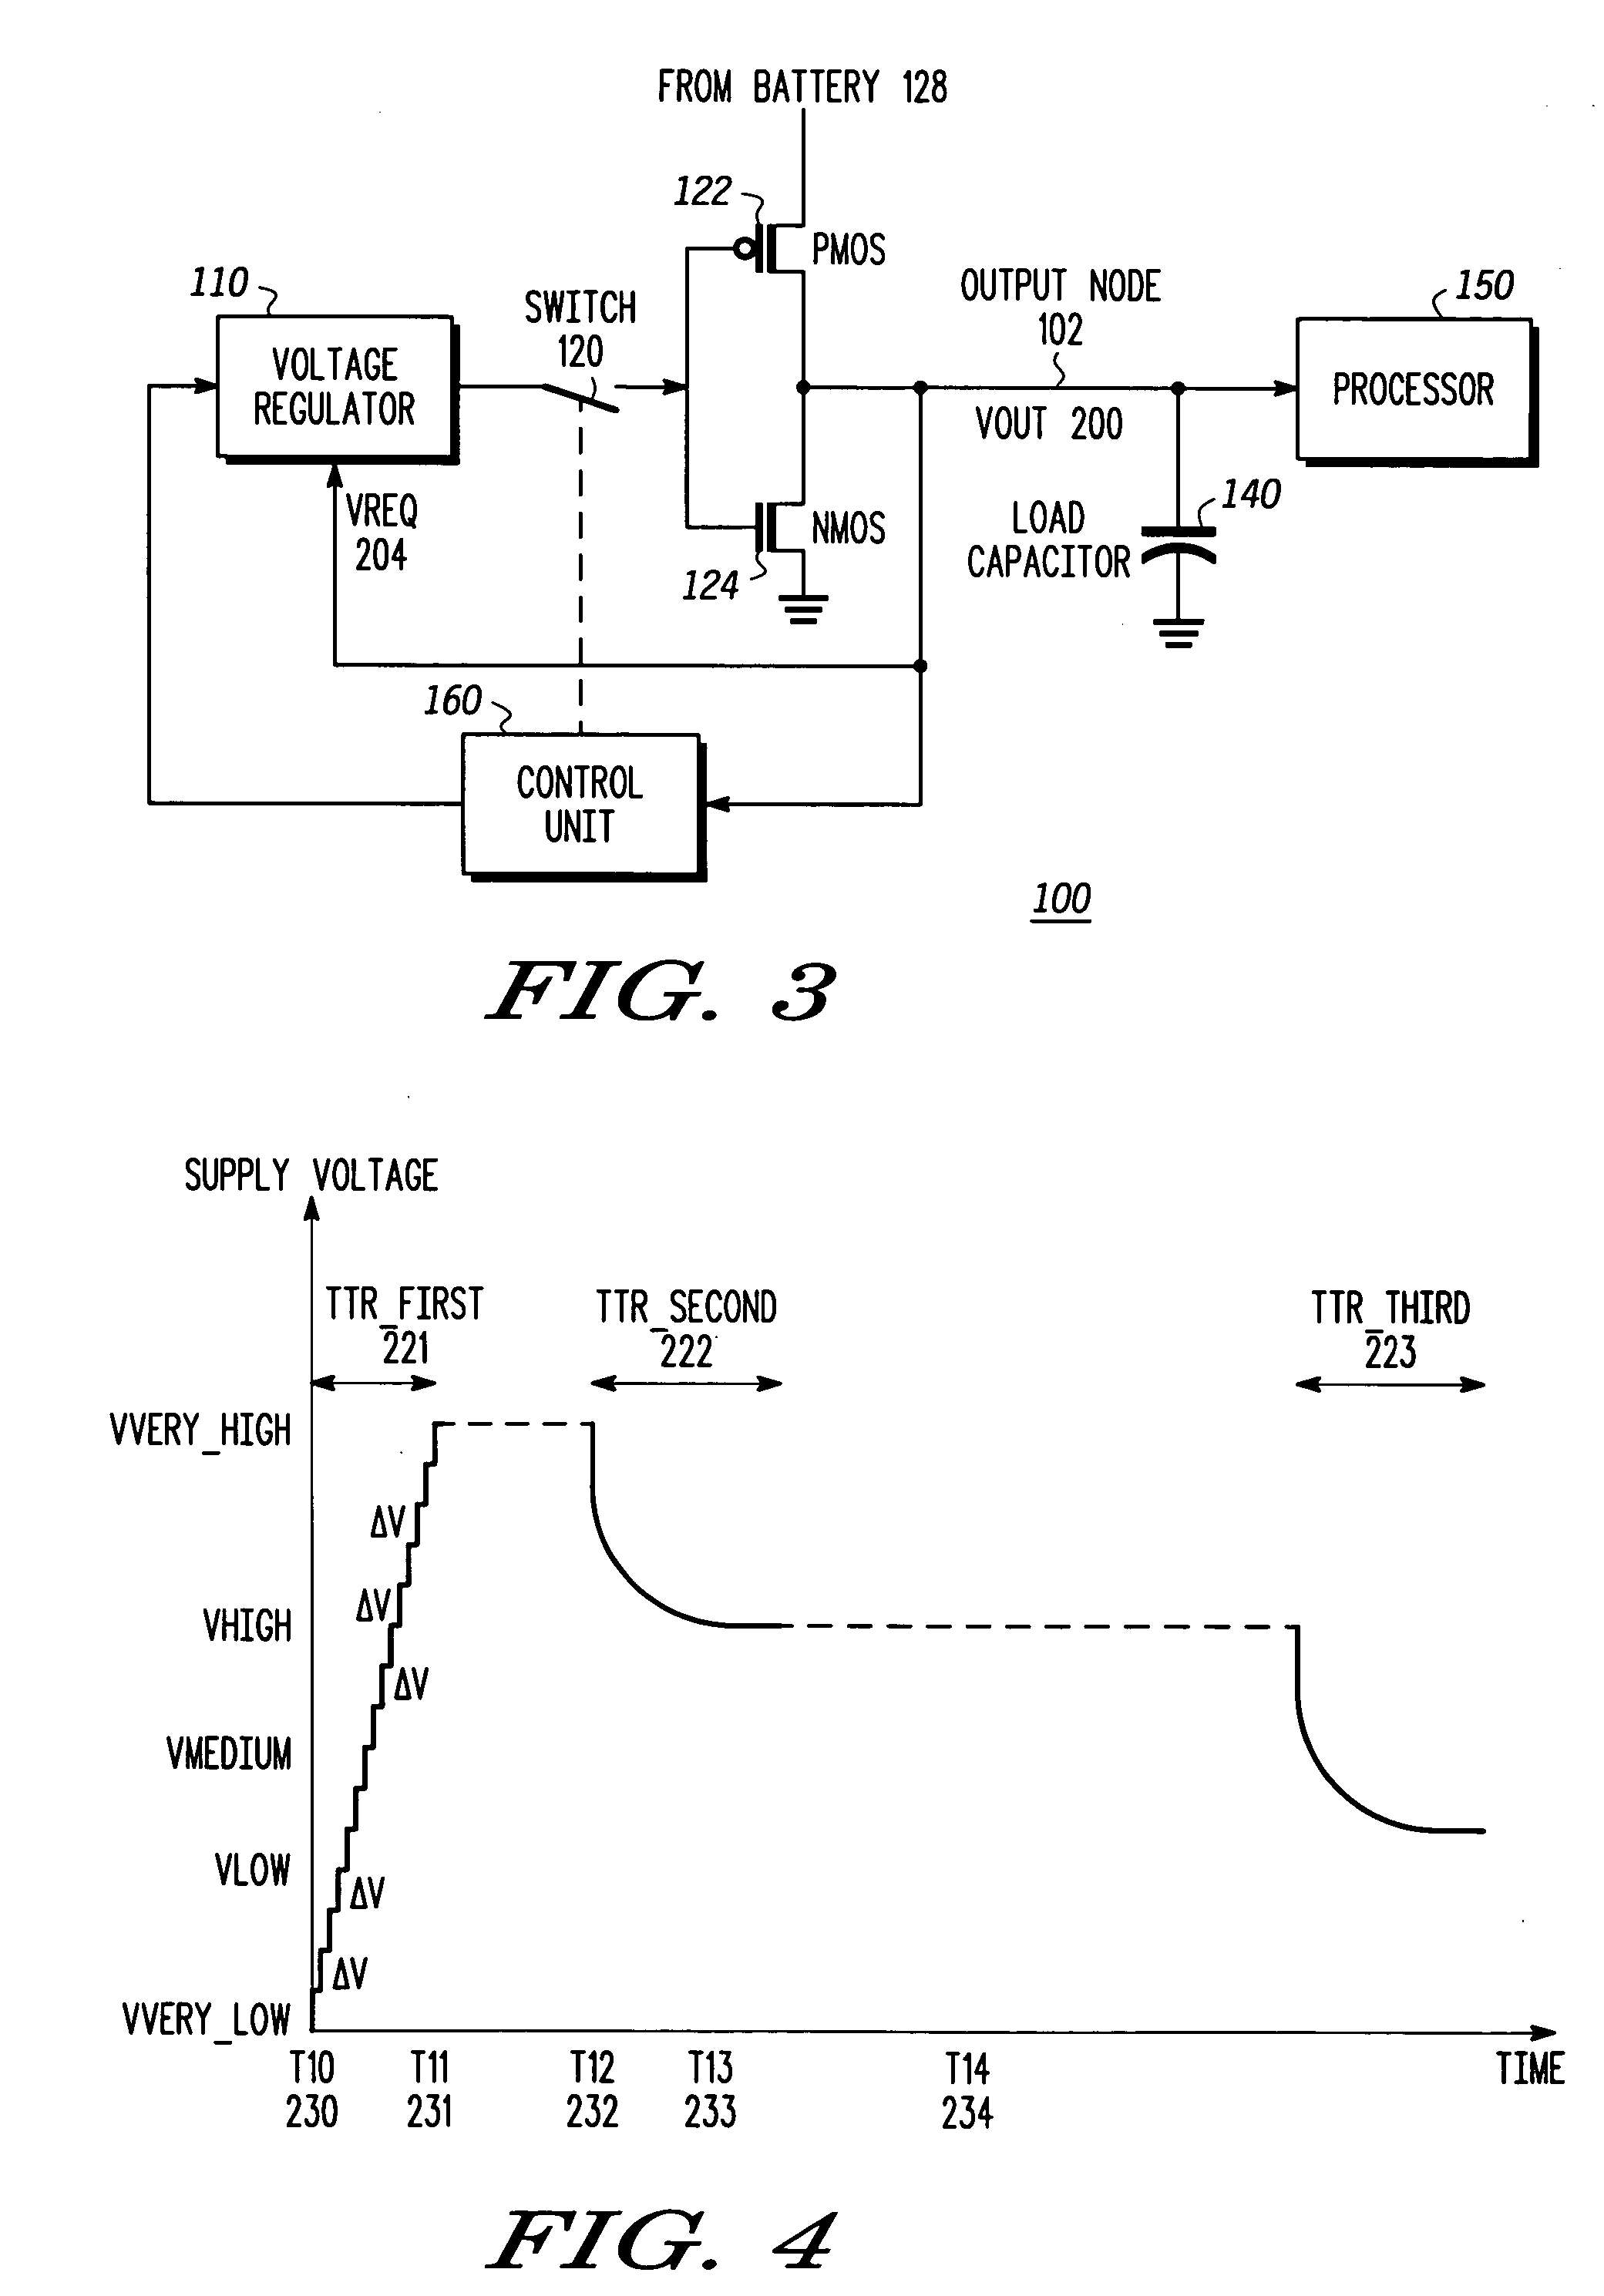 Apparatus and method for high speed voltage regulation